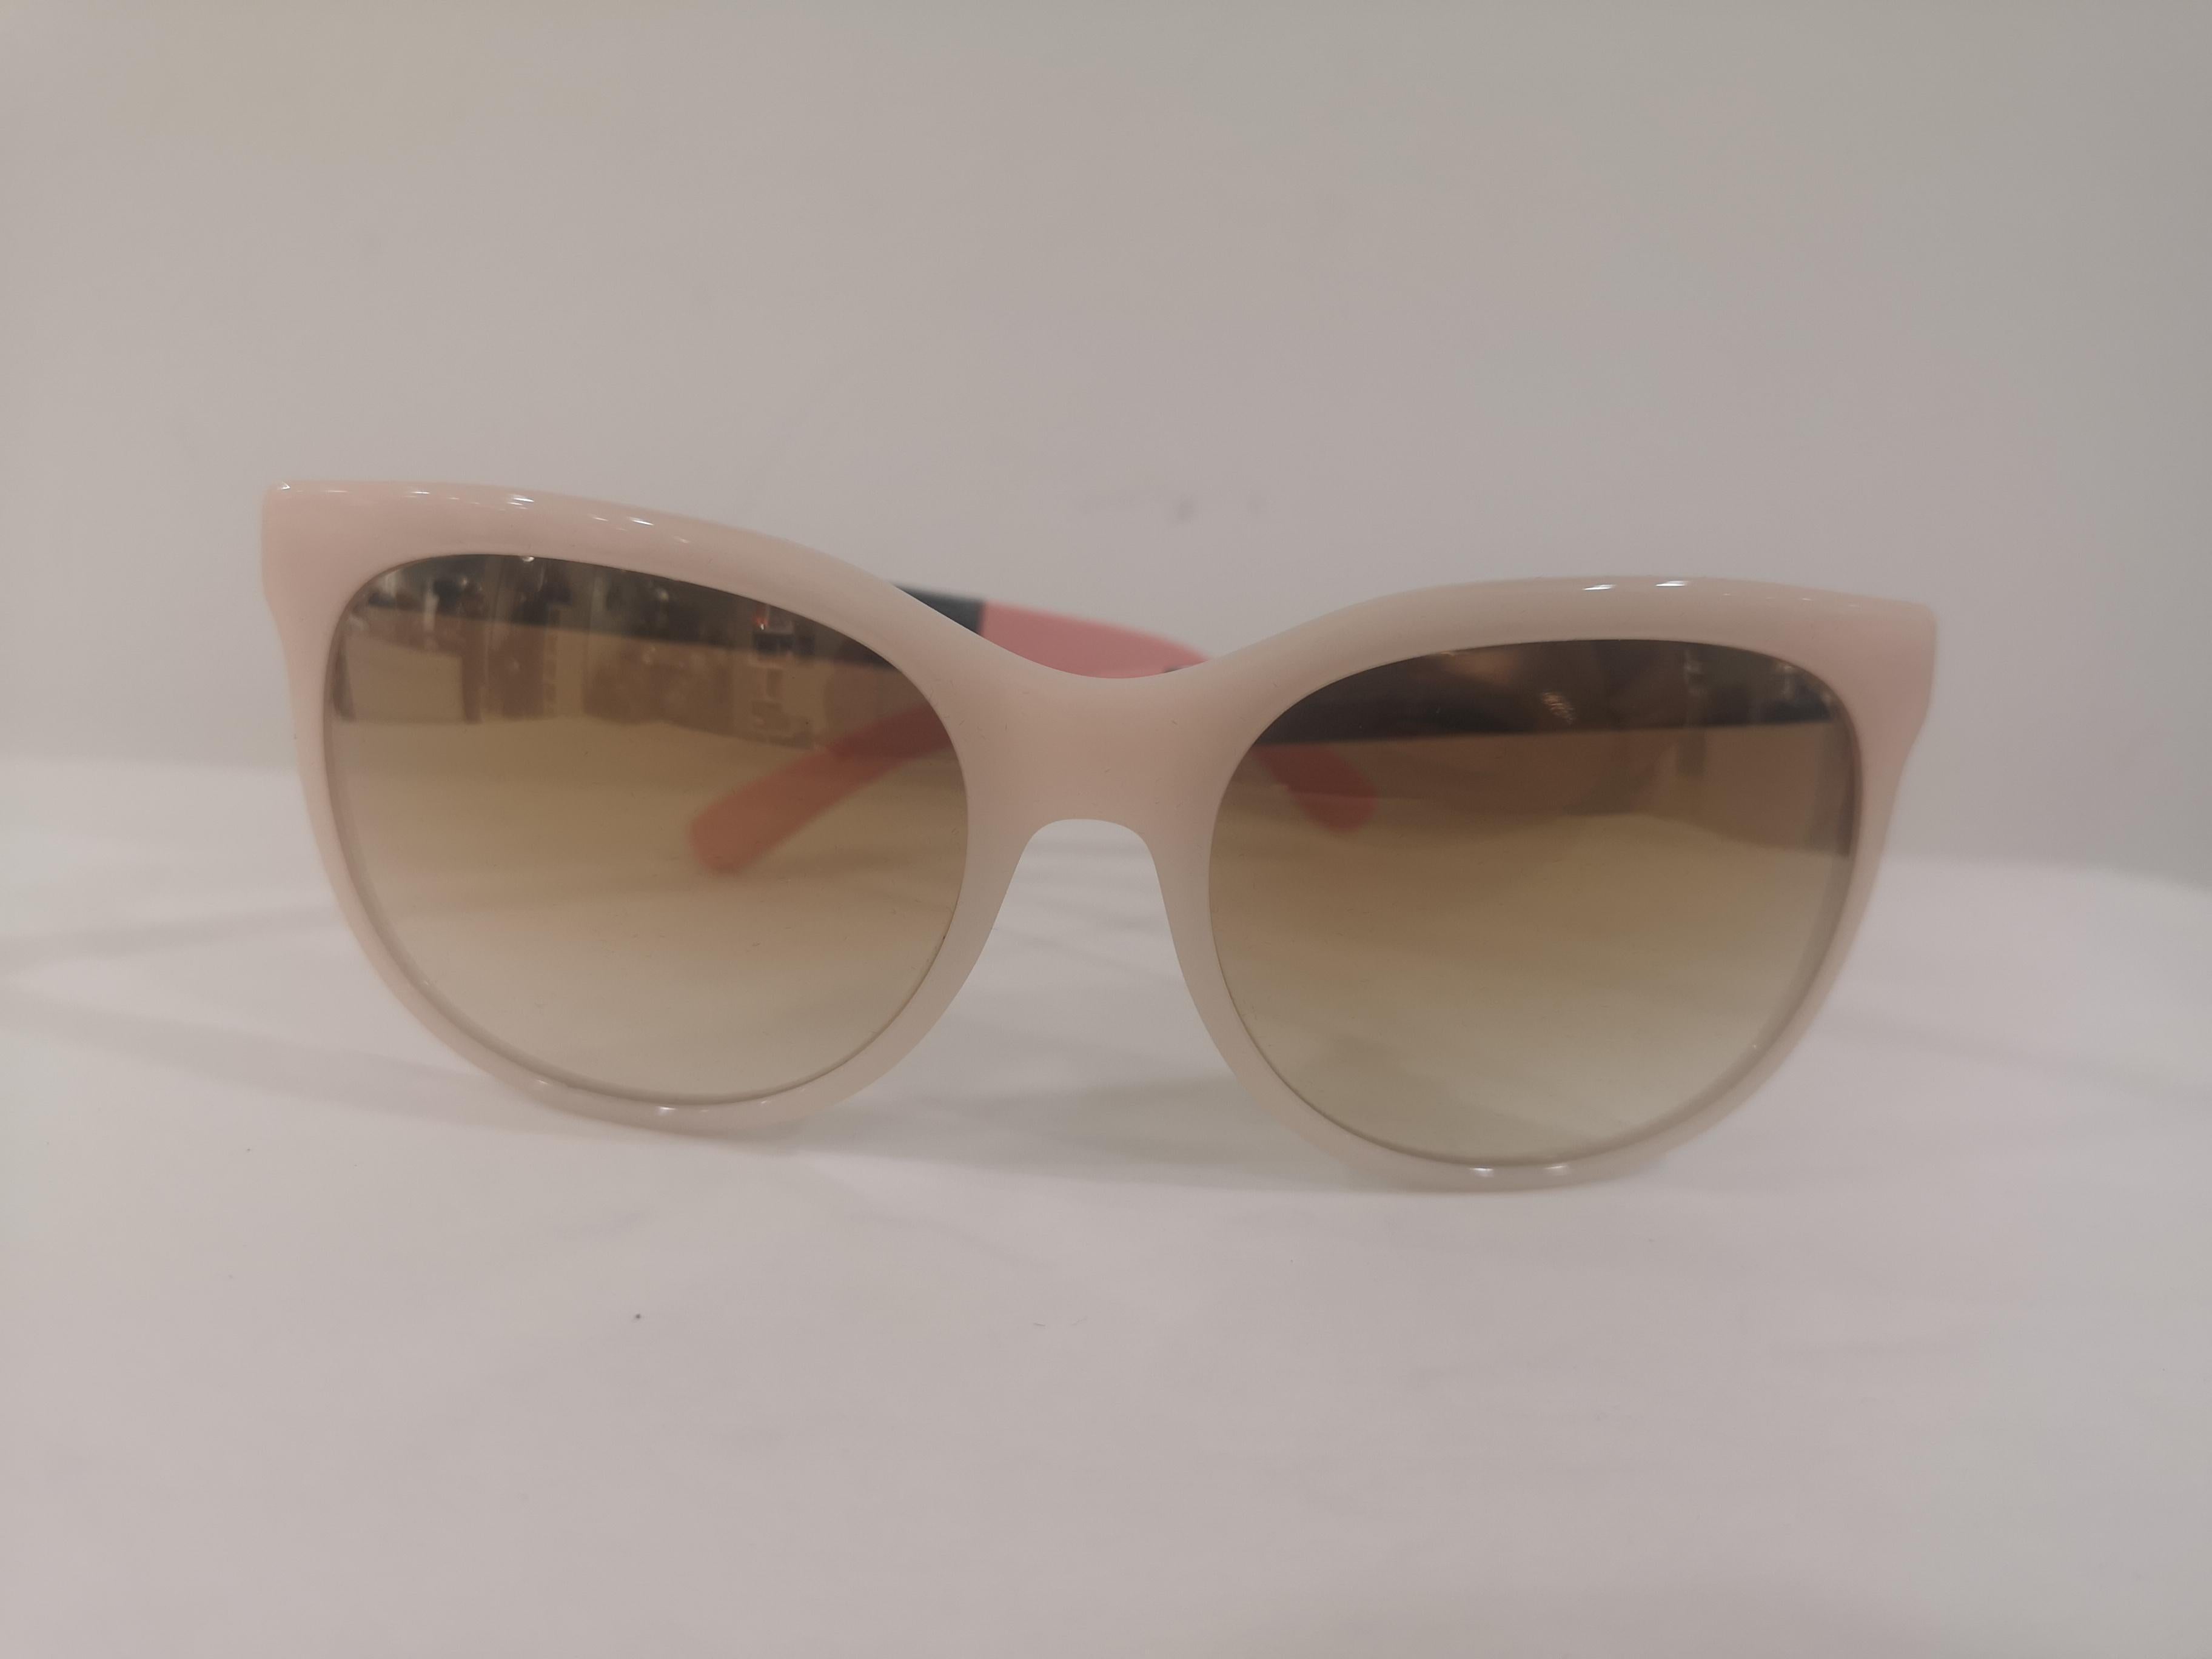 Marc by Marc Jacobs Pfirsich rosa Sonnenbrille NWOT im Angebot 1